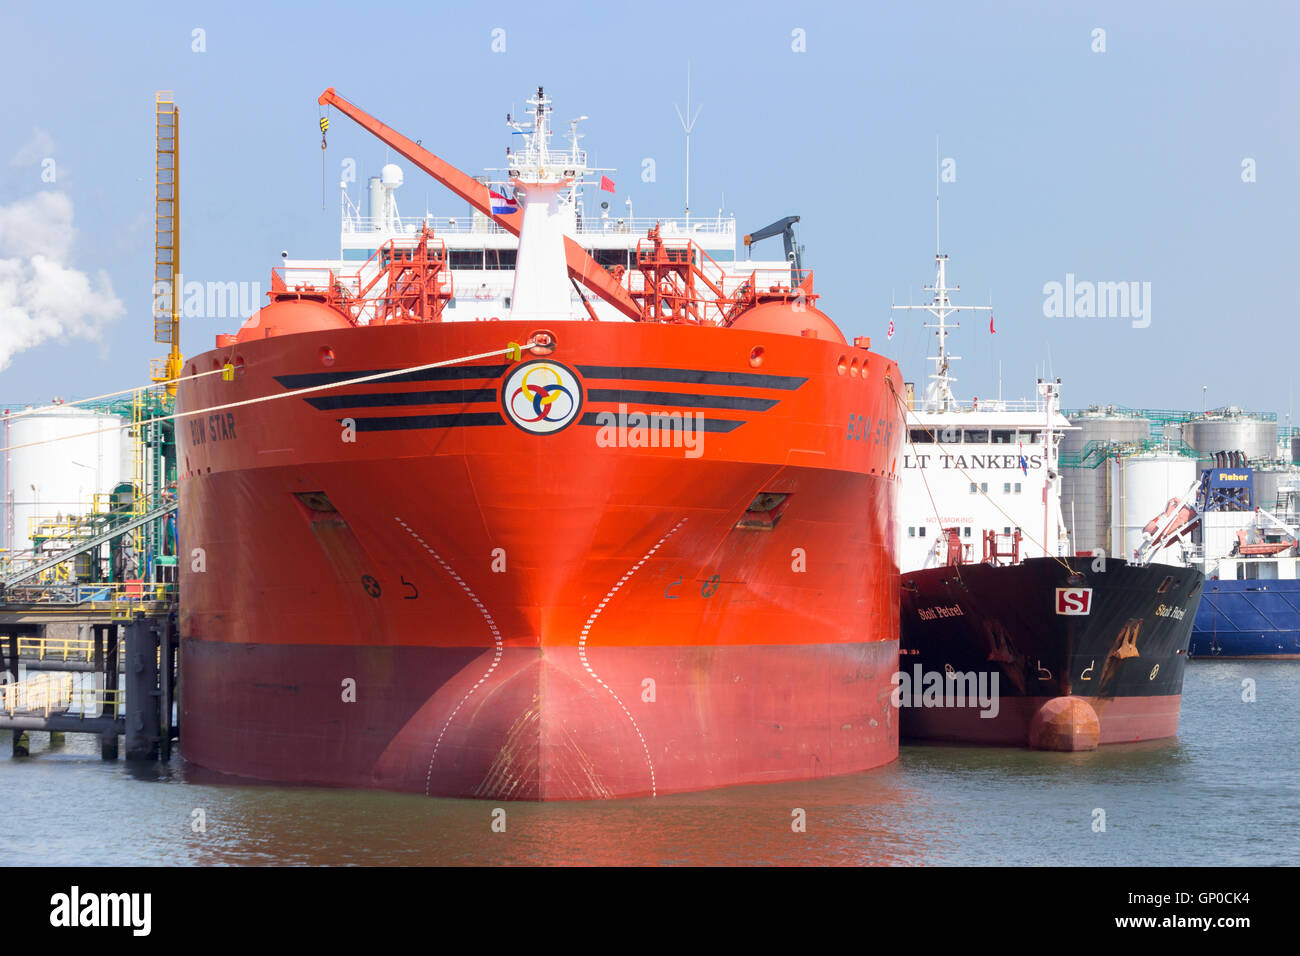 ROTTERDAM - AUG 1, 2014: Oil/Chemical tanker Bow Star moored in the Port of Rotterdam. The port is the largest in Europe and fac Stock Photo